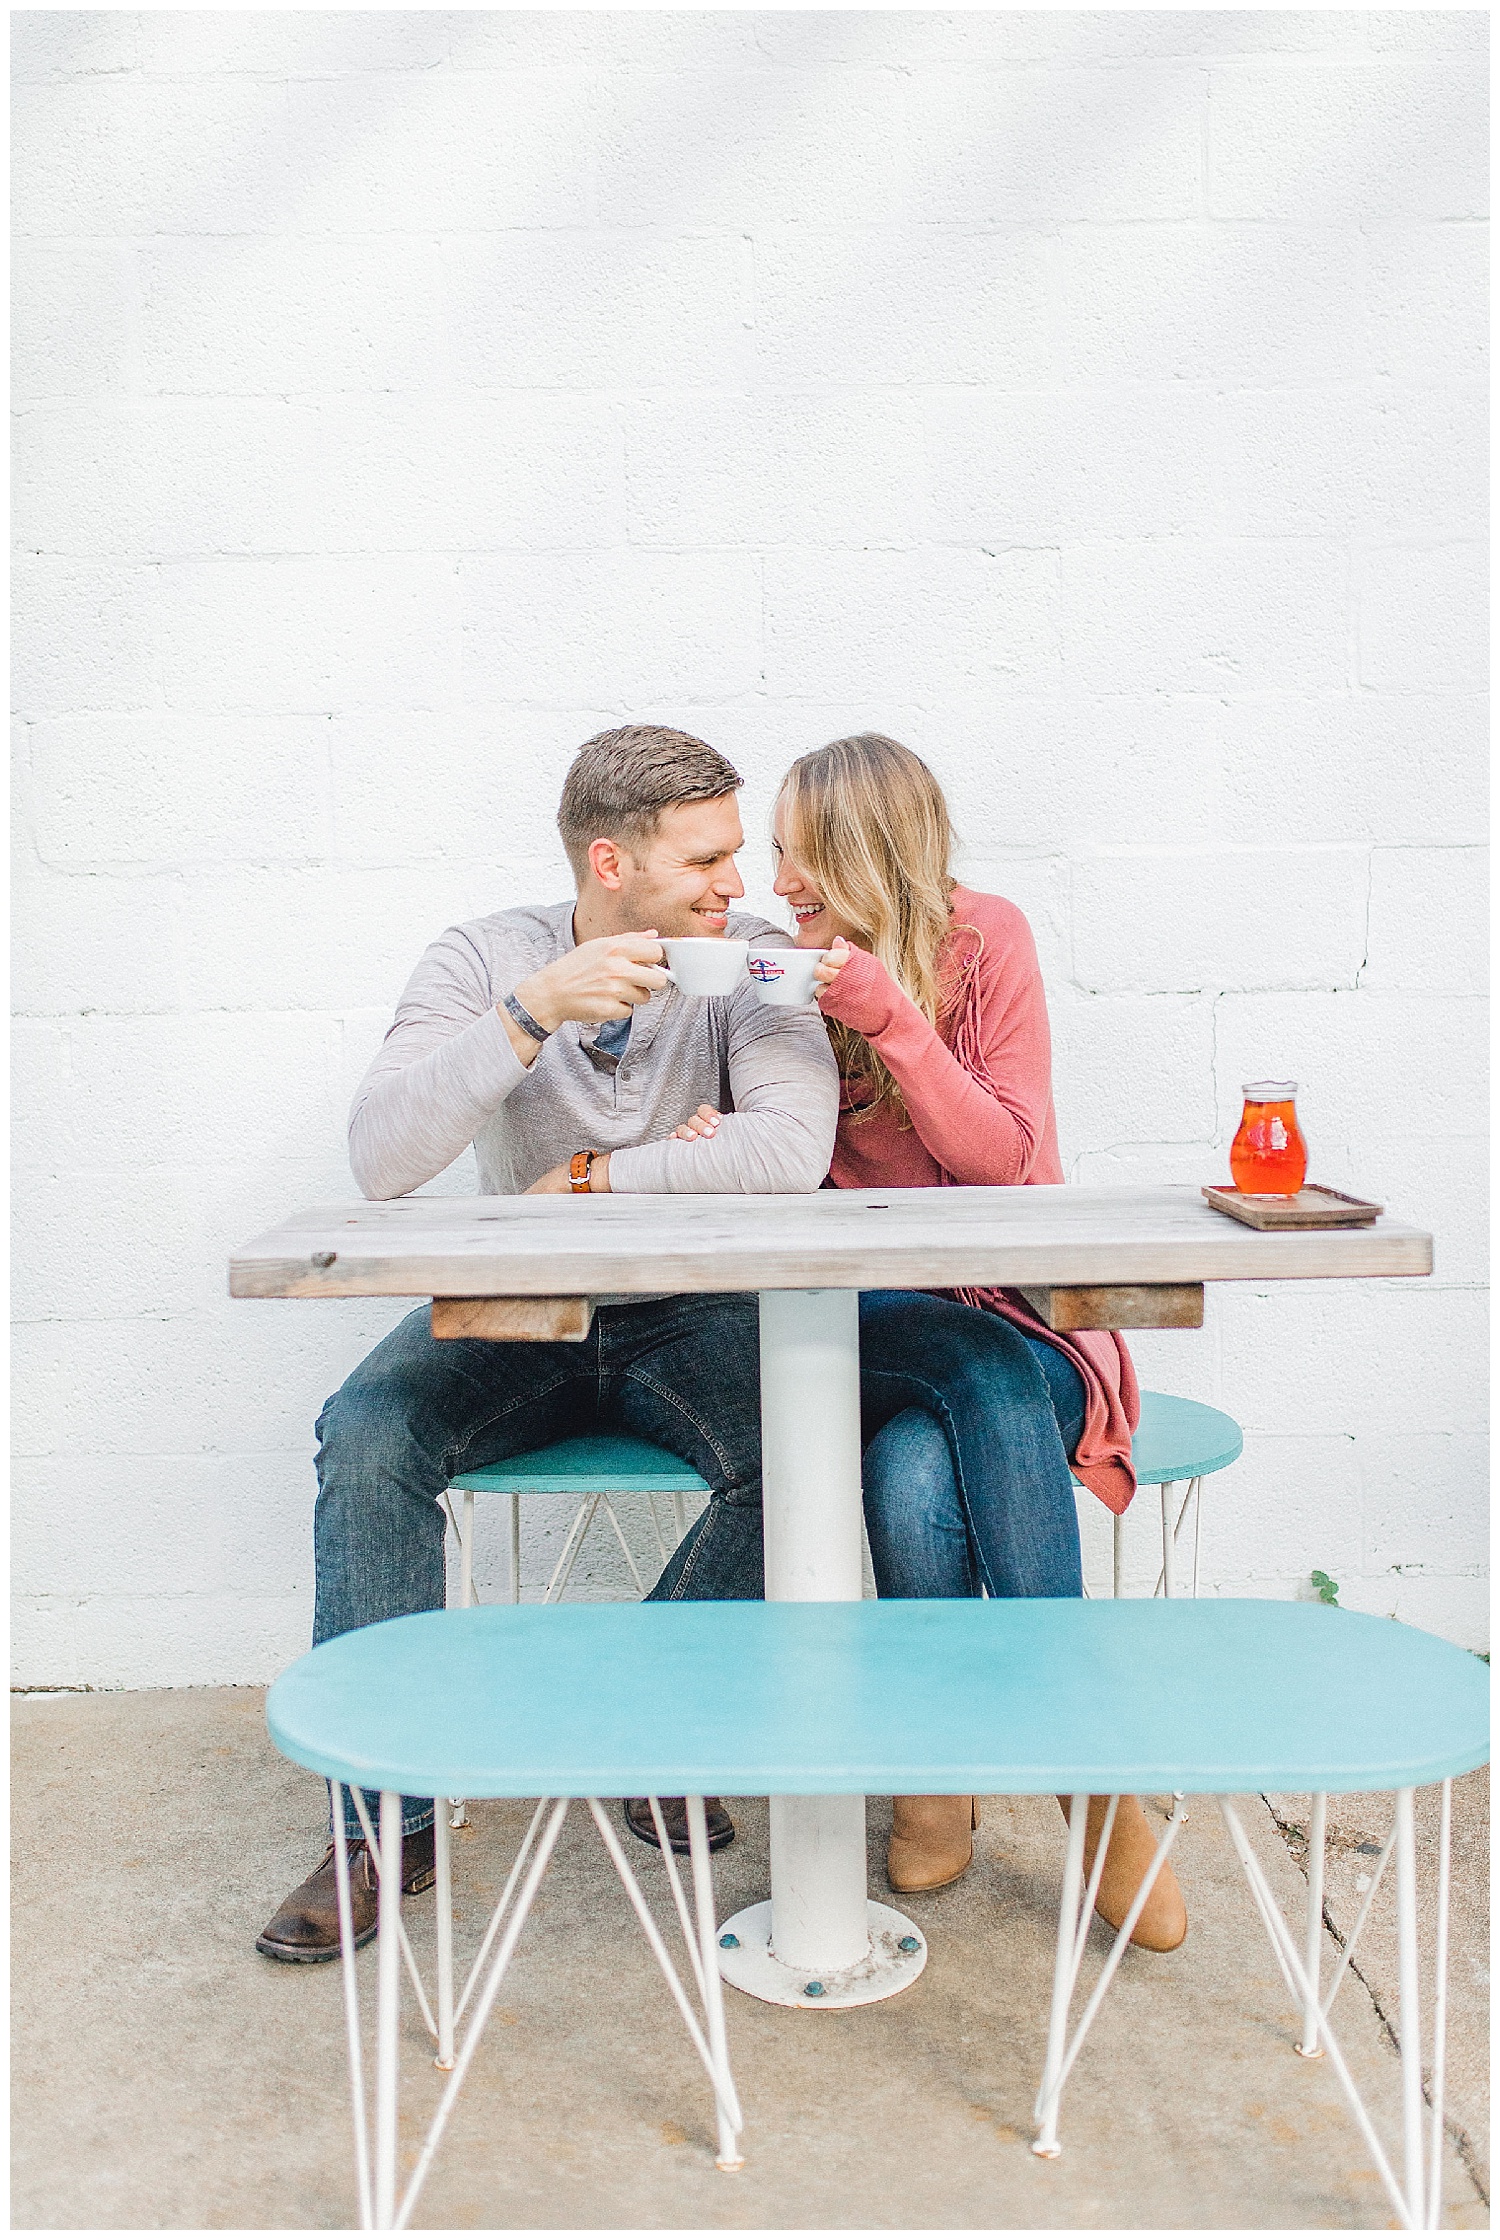 ERC_0925_Downtown Nashville Engagement Session at Barista Parlor | Emma Rose Company Wedding Photographer | Outfit Inspiration for Engagement Session | Kindred Light and Airy Photographer.jpg